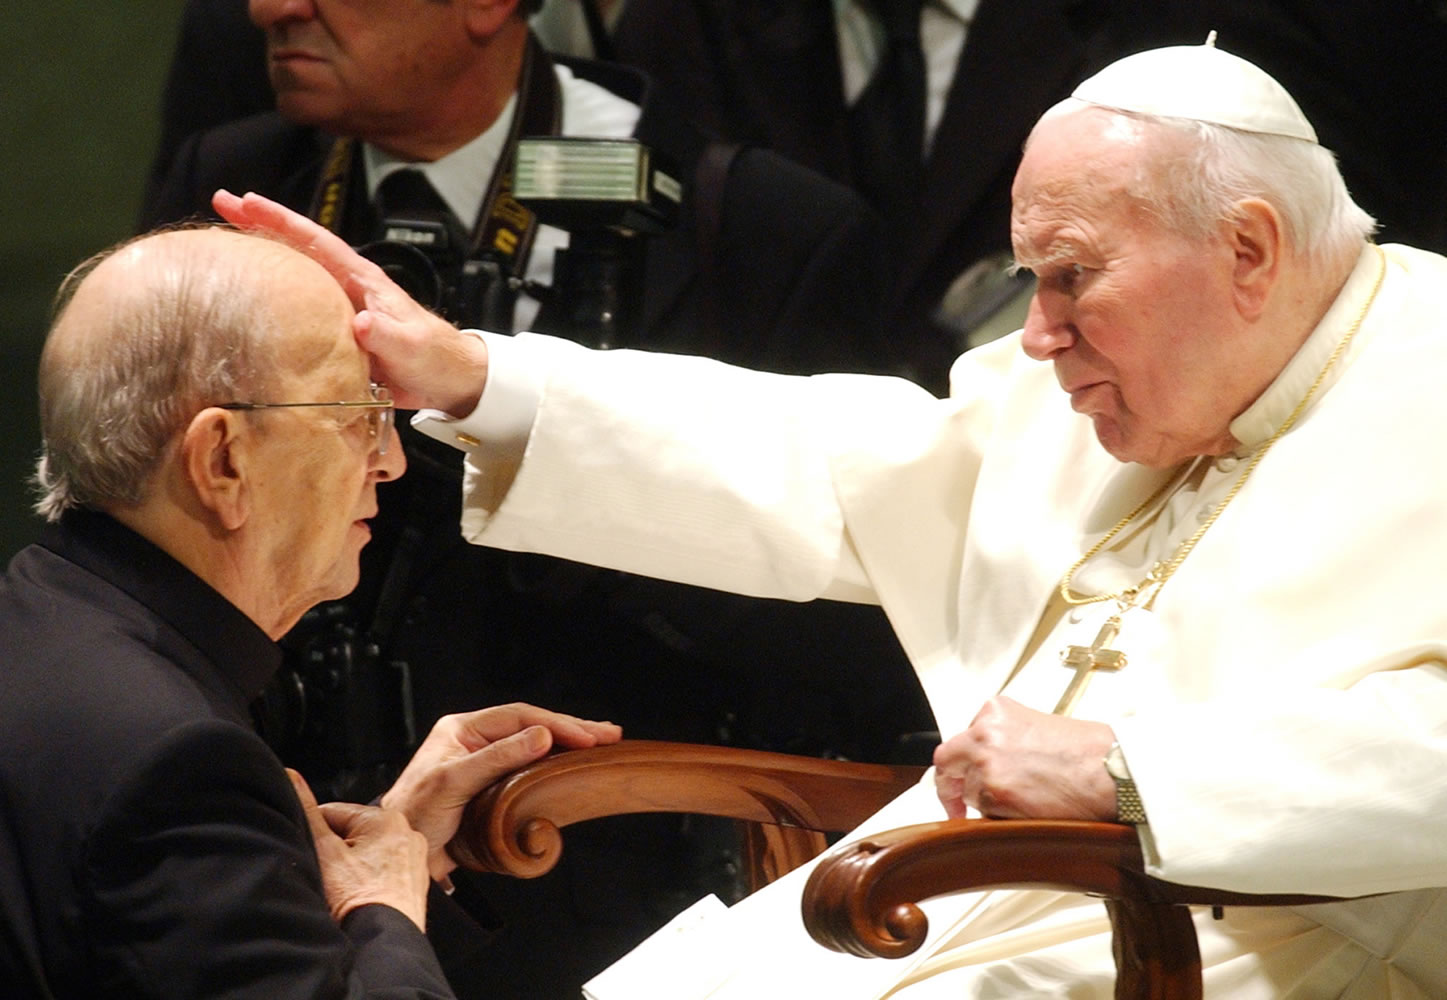 Pope John Paul II gives his blessing Nov. 30, 2004 to the Rev. Marcial Maciel, founder of the Legion of Christ.